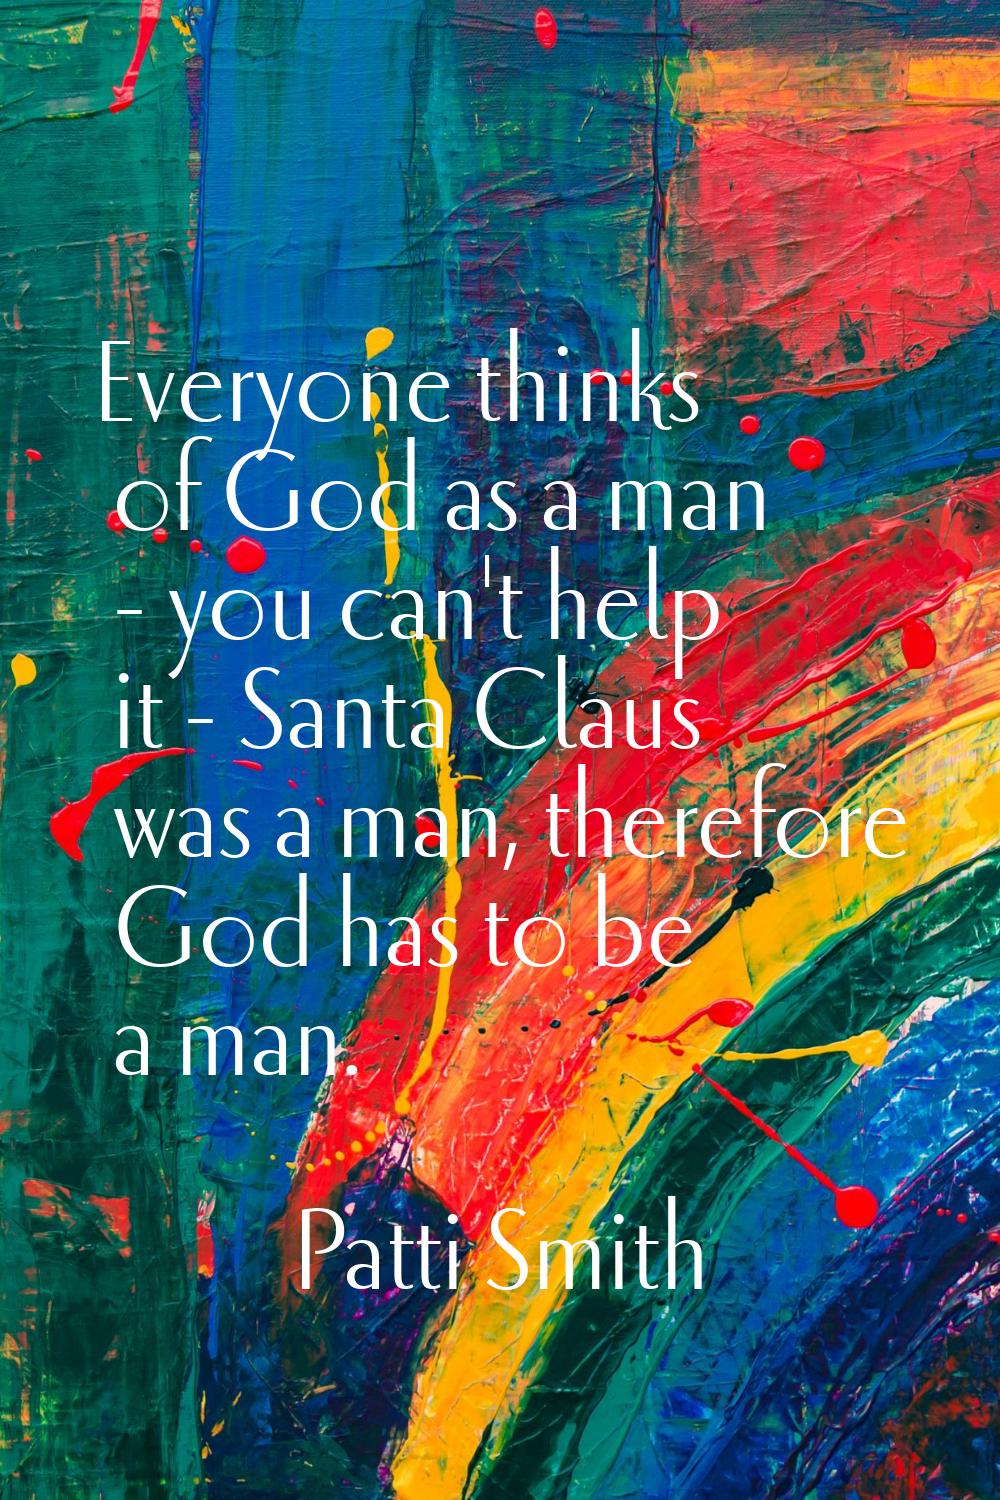 Everyone thinks of God as a man - you can't help it - Santa Claus was a man, therefore God has to b